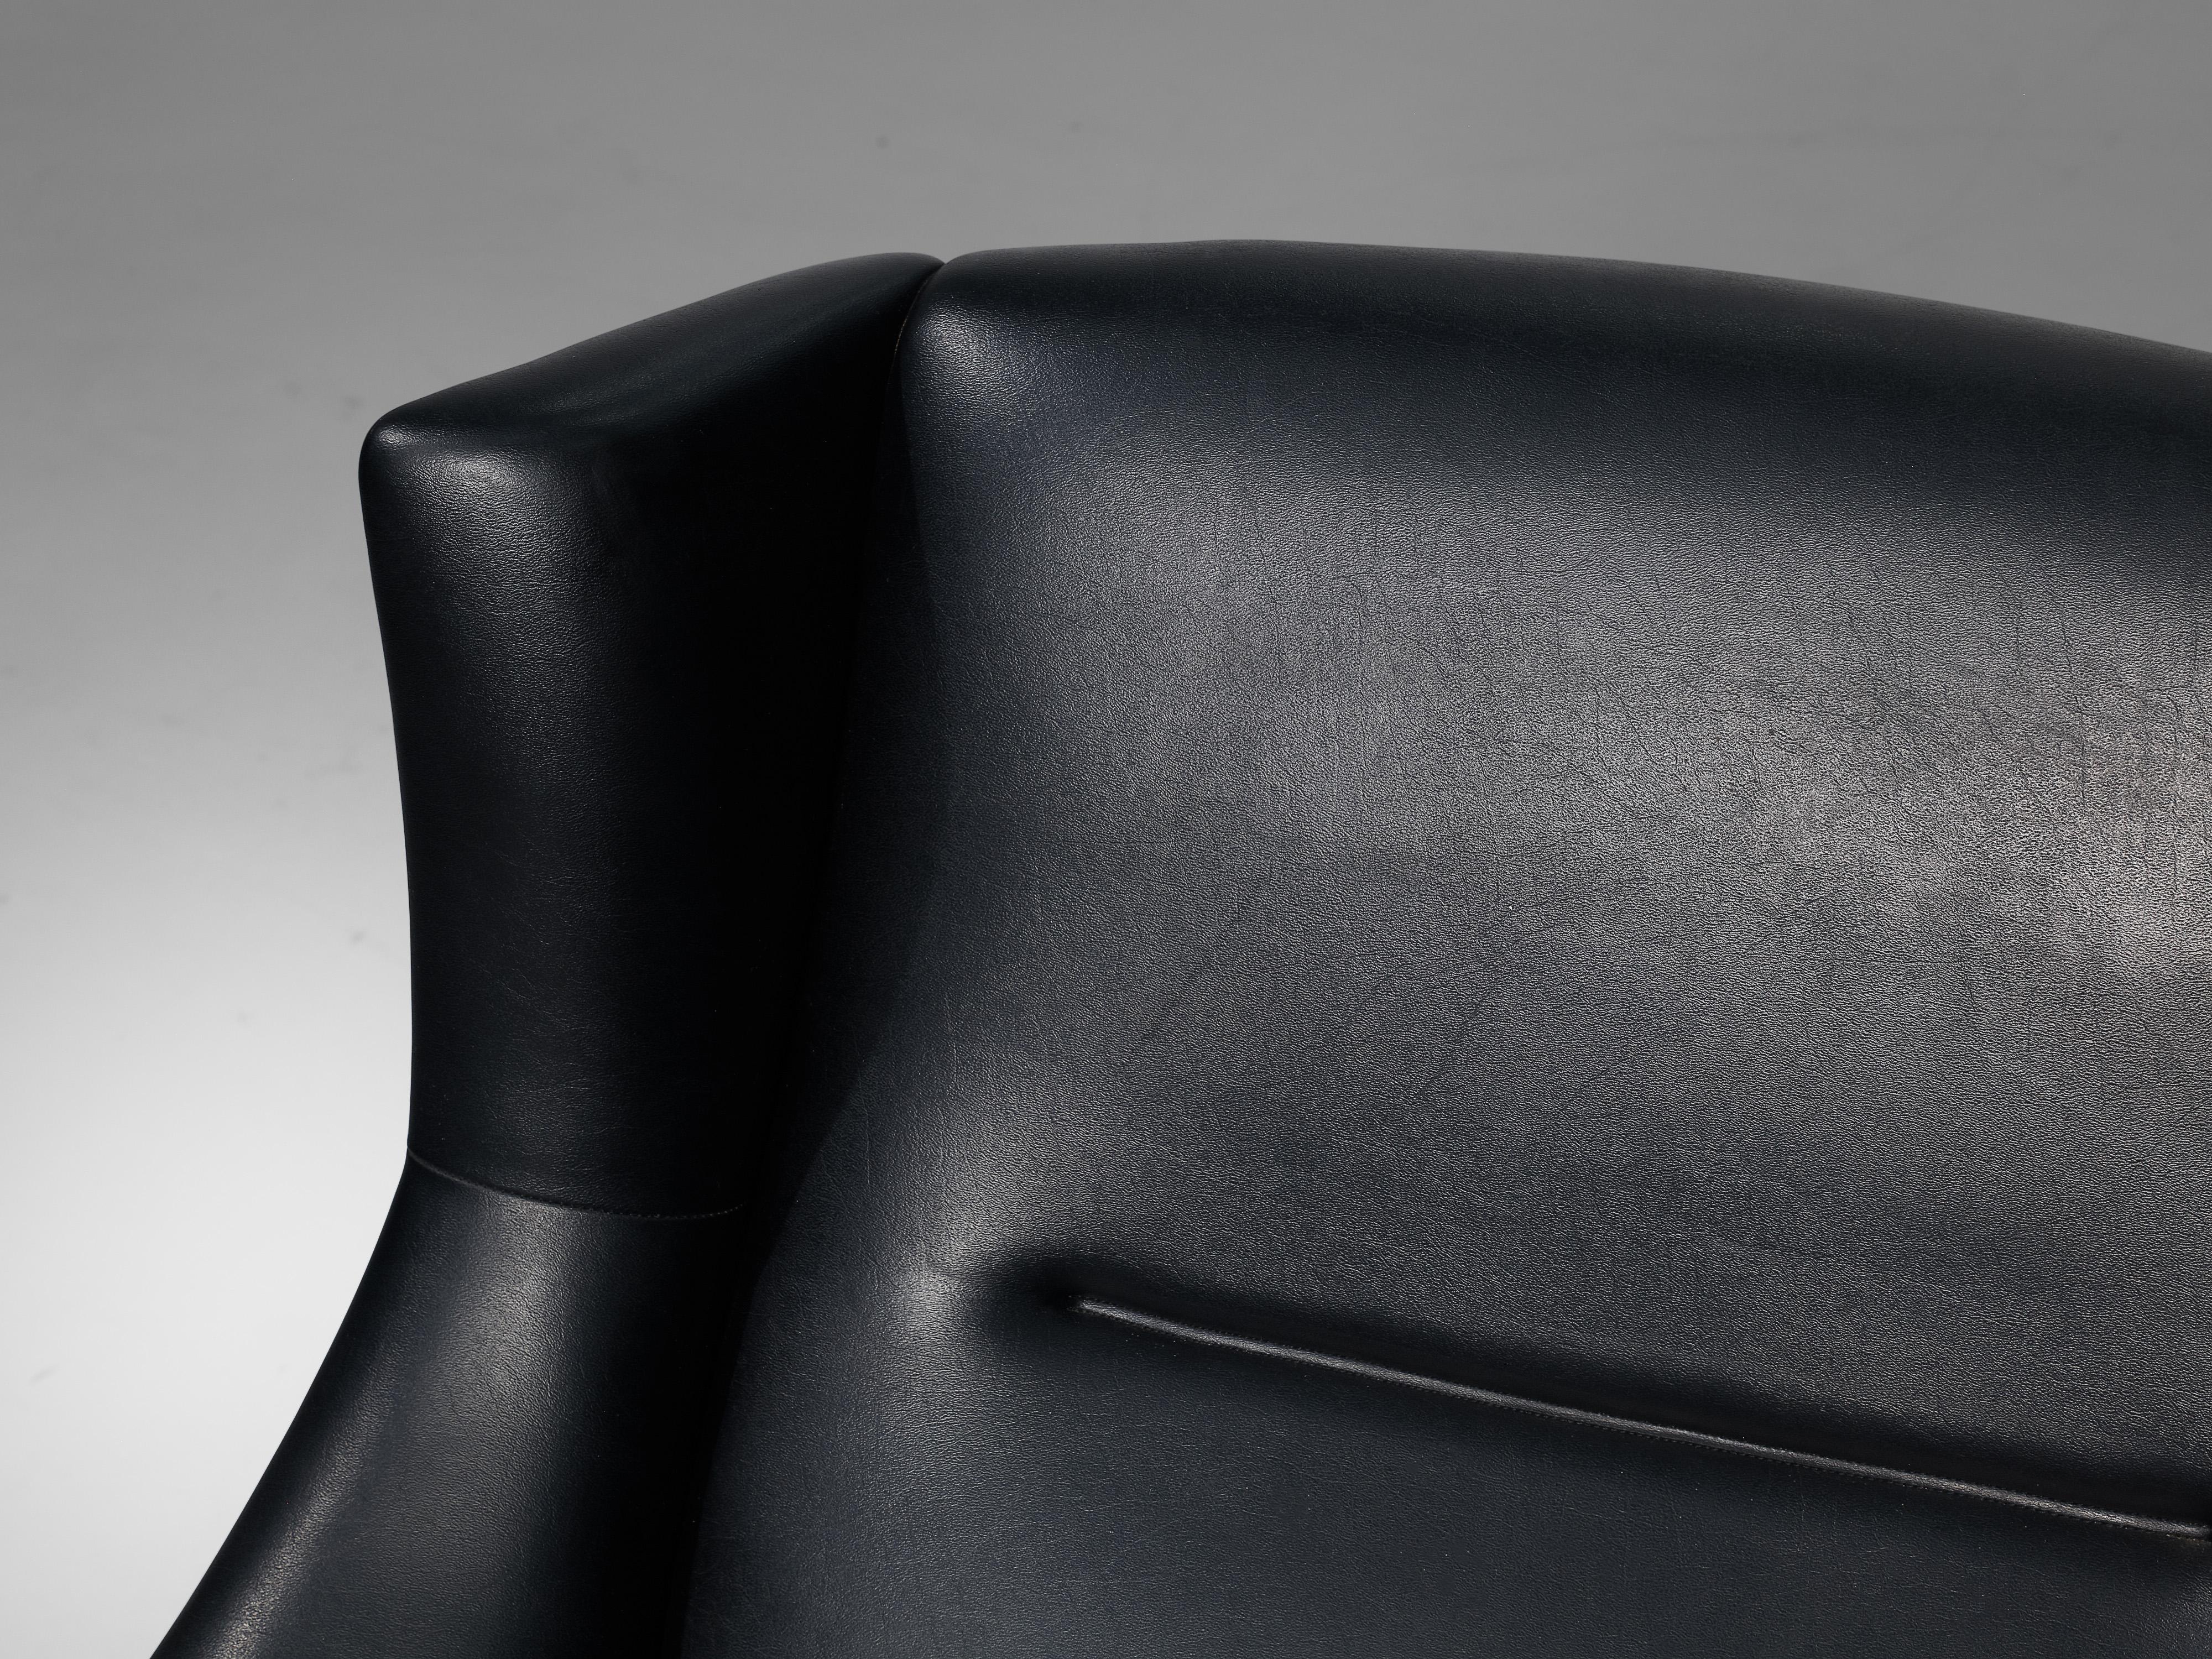 Danish Lounge Chair in Black Leatherette and Teak